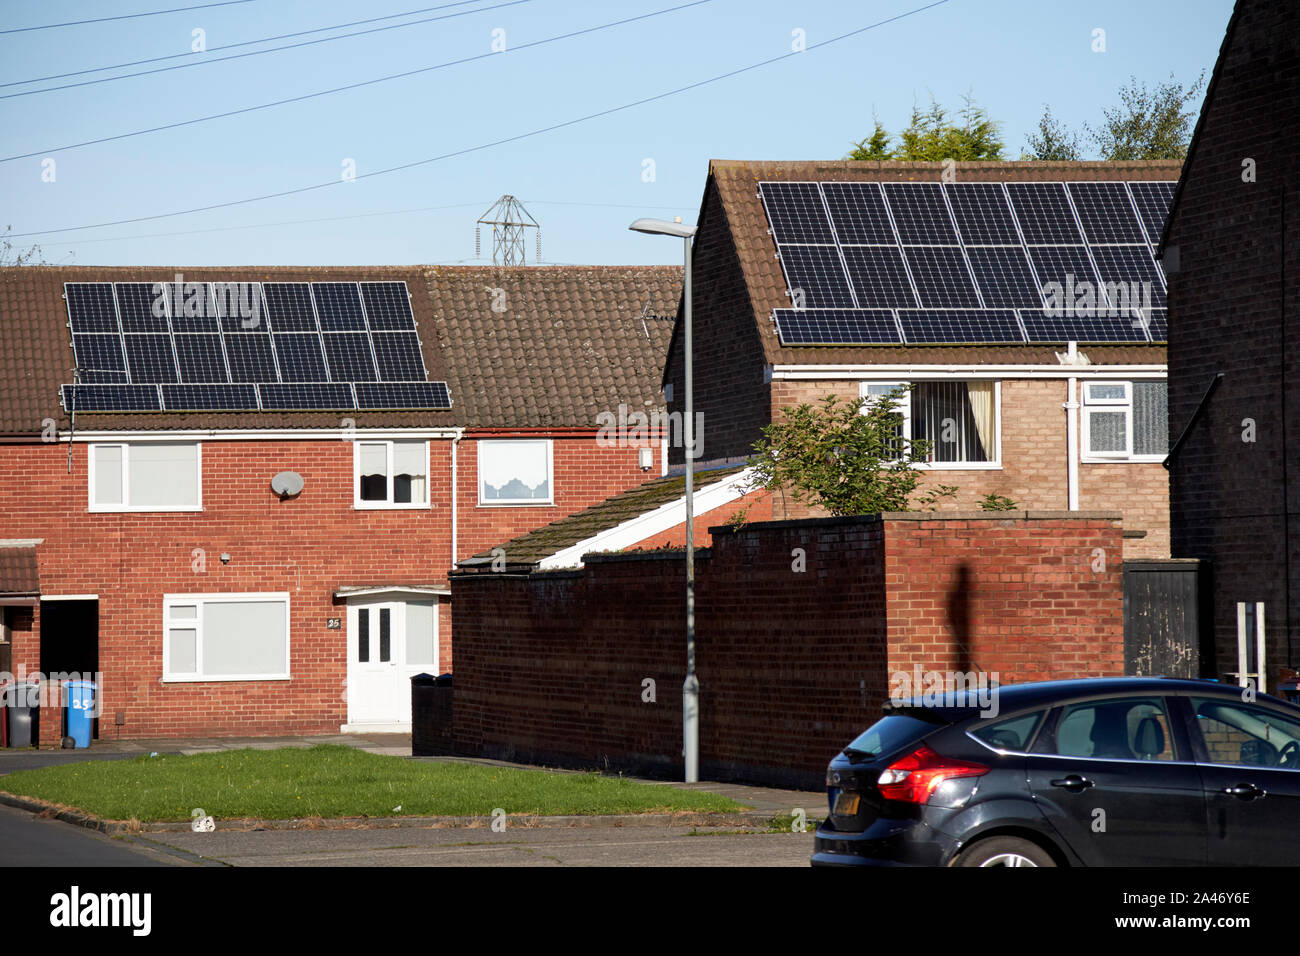 solar panels on south facing rooves of houses in a street in Liverpool England UK Stock Photo